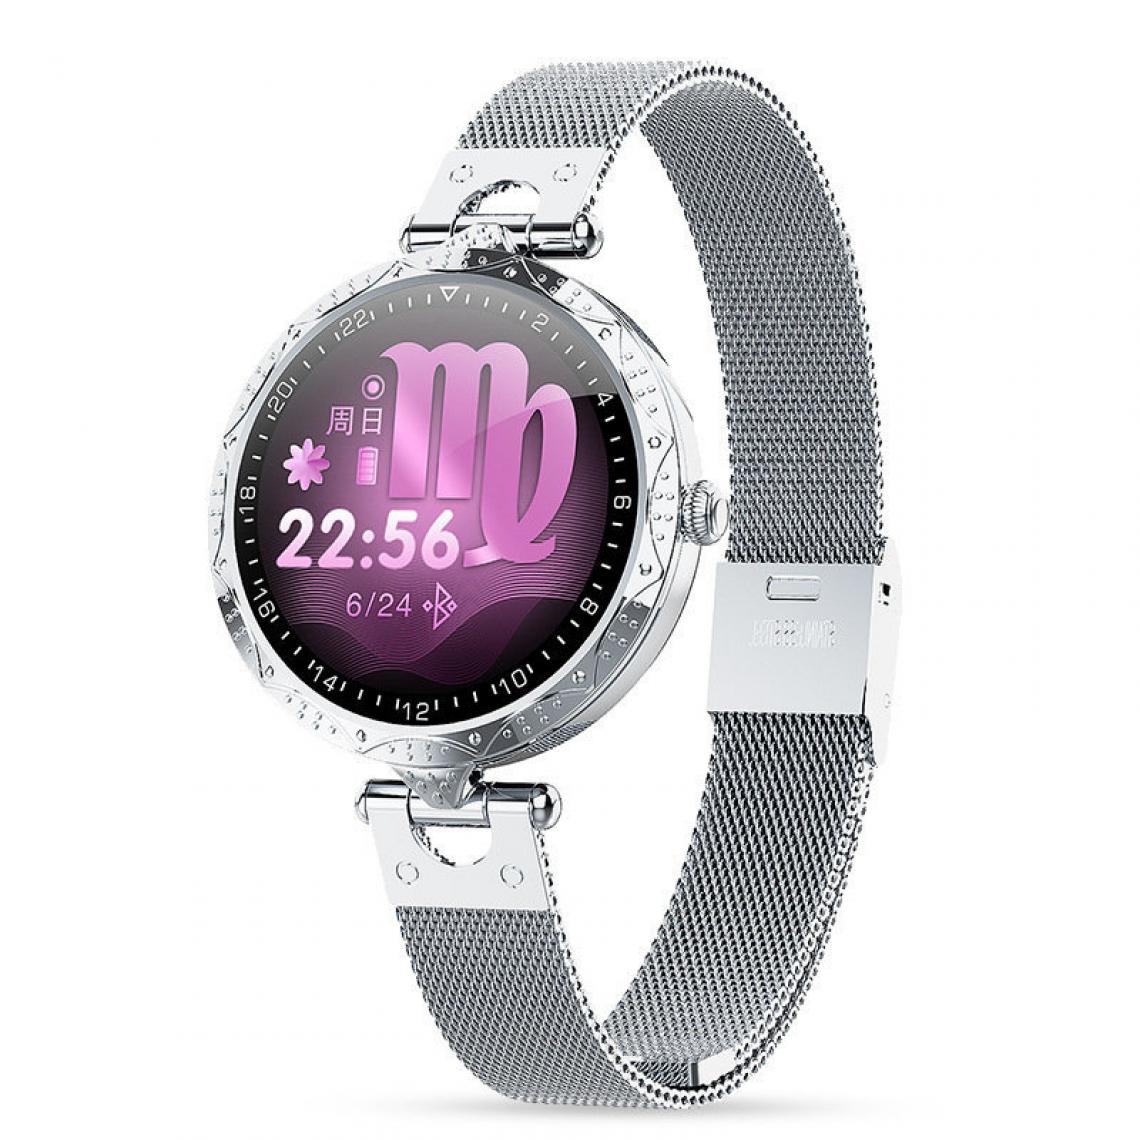 Chronotech Montres - Smart Watches for Women 1.09 inch Touch Screen Smartwatch Fitness Trackers with Heart Rate Monitor Waterproof IP68 Fitness Tracker Watch Pedometer(silver) - Montre connectée